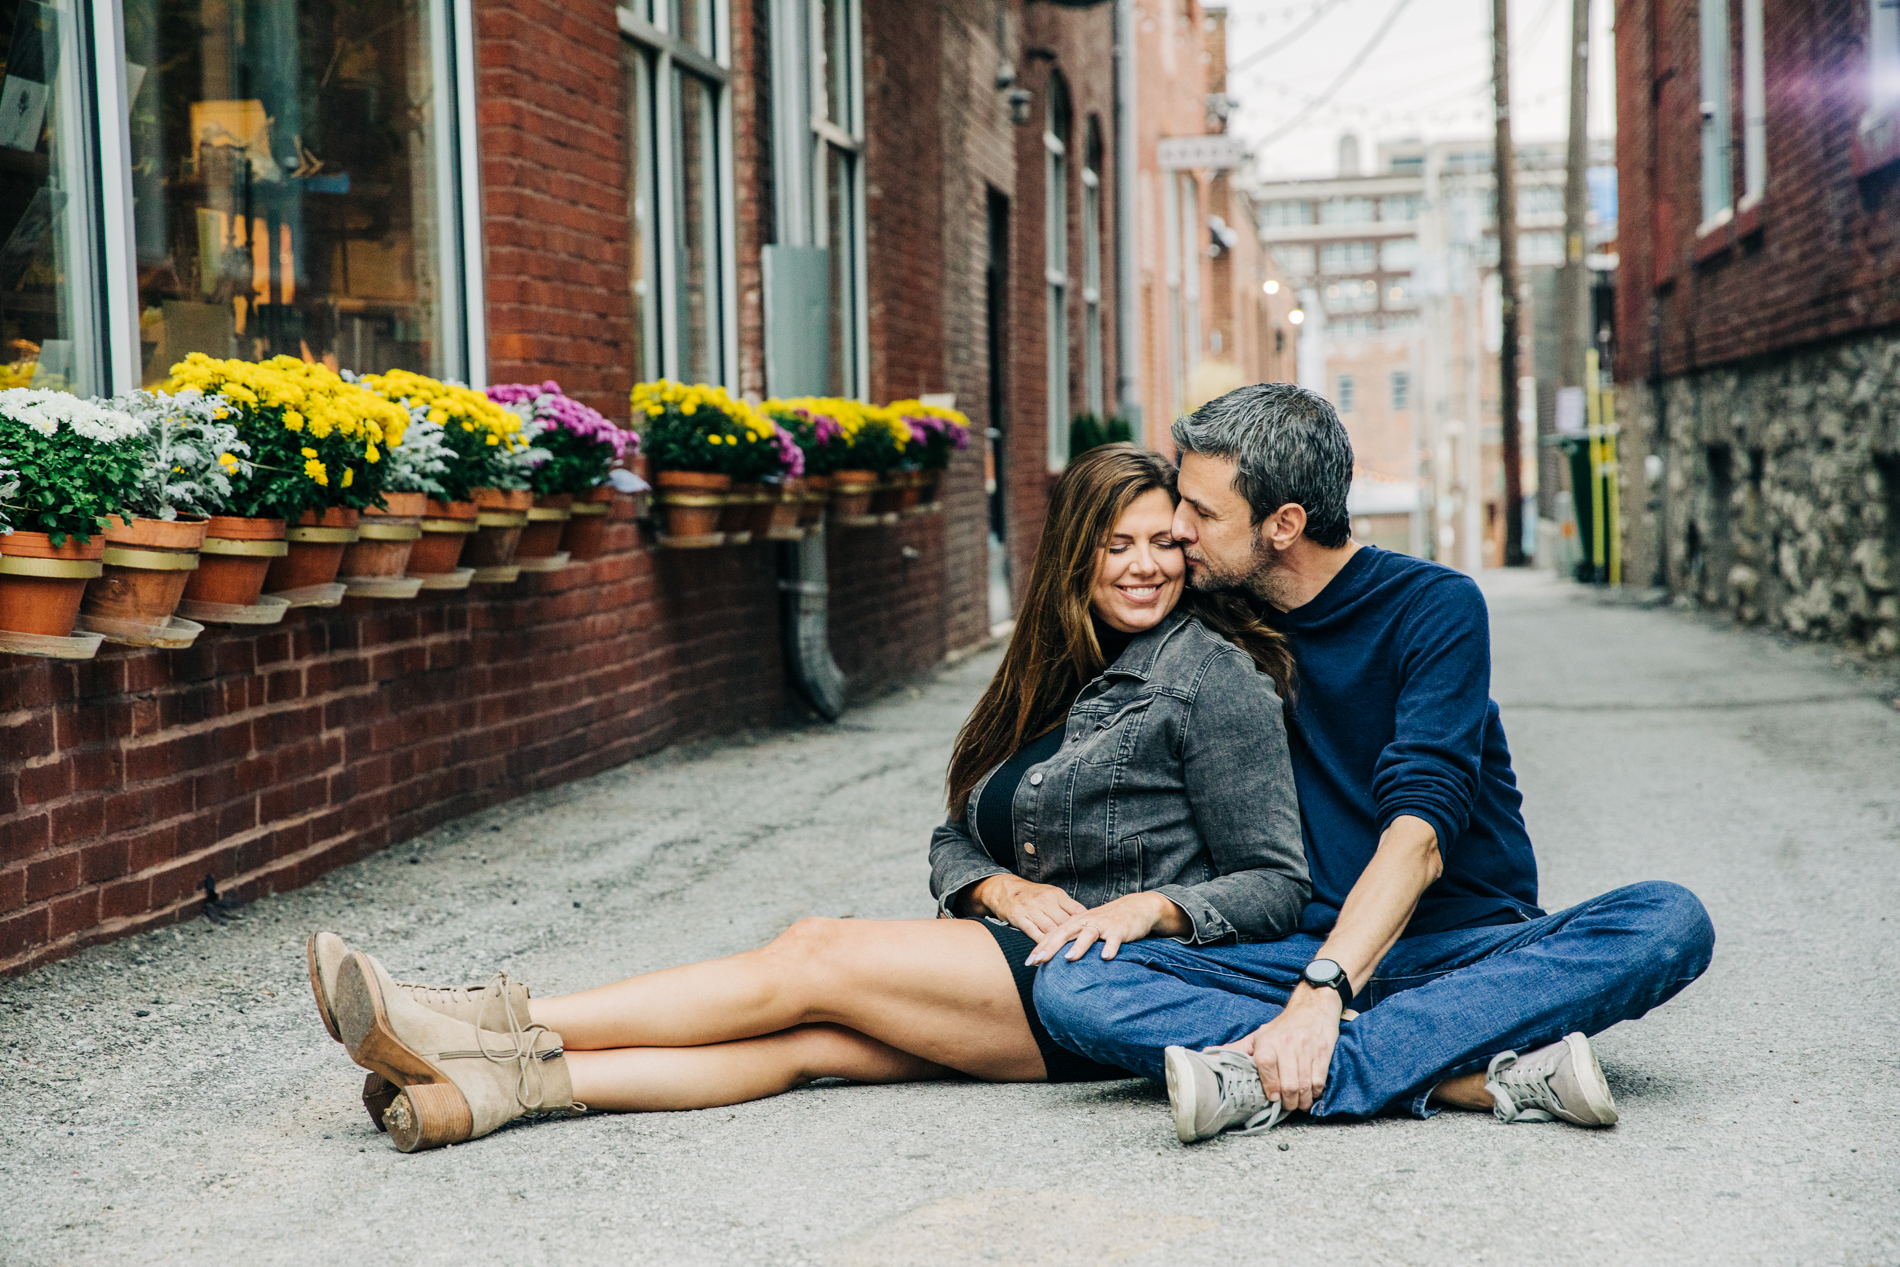 The Bauer engagement photography